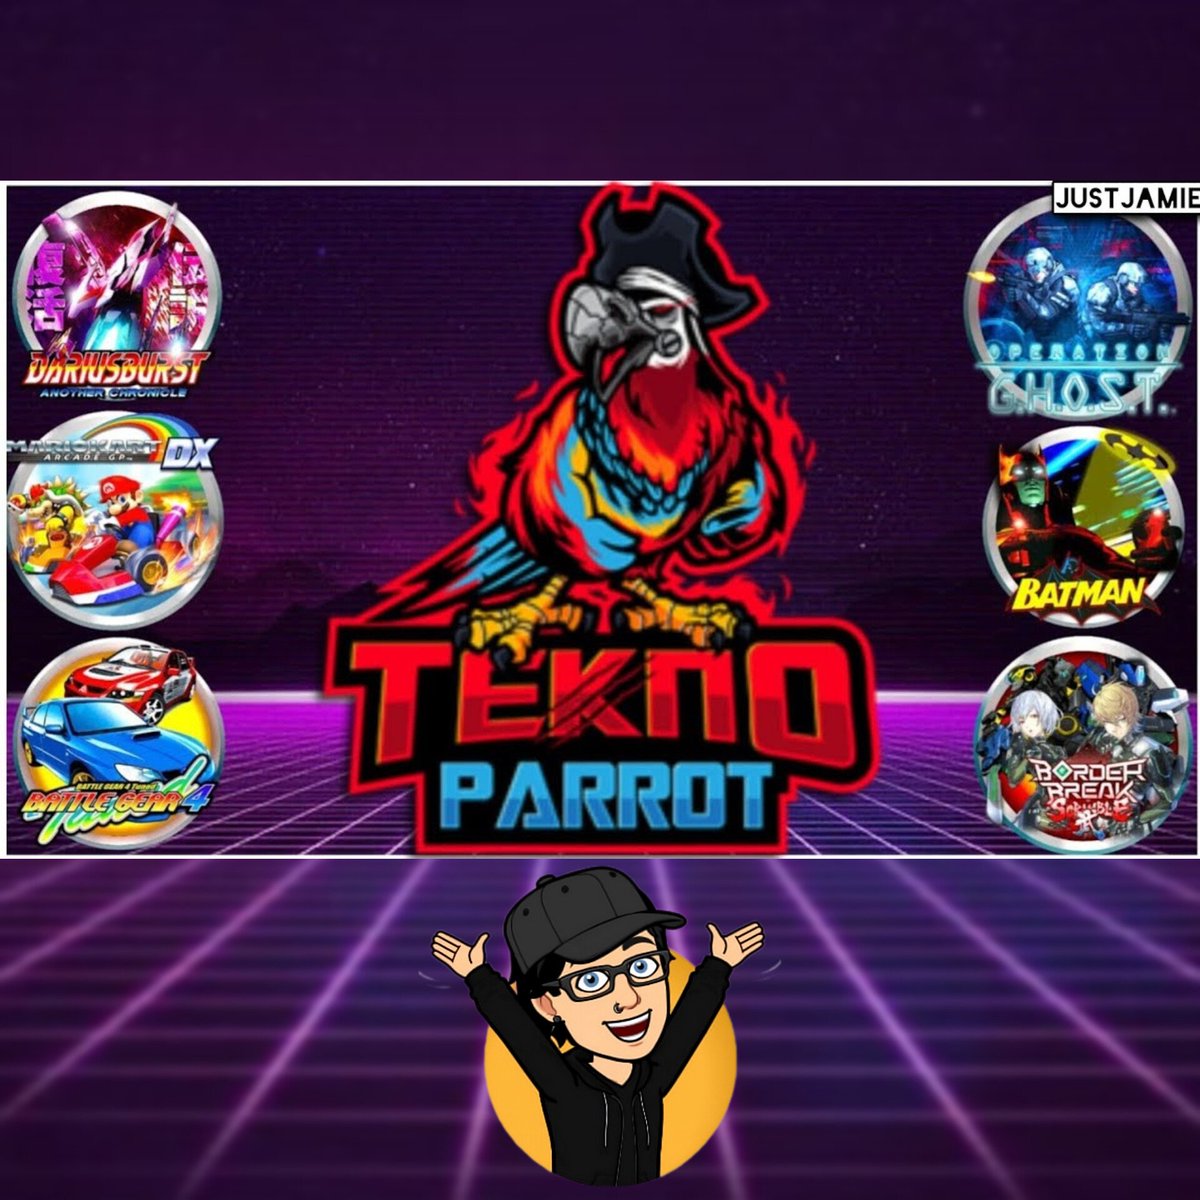 Don't forget. I have a whole arcade emulation playlist. Here is one that is fairly popular. Teknoparrot full setup guide! youtu.be/fYE77cxpBwE #teknoparrot #arcade #emulator #justjamie